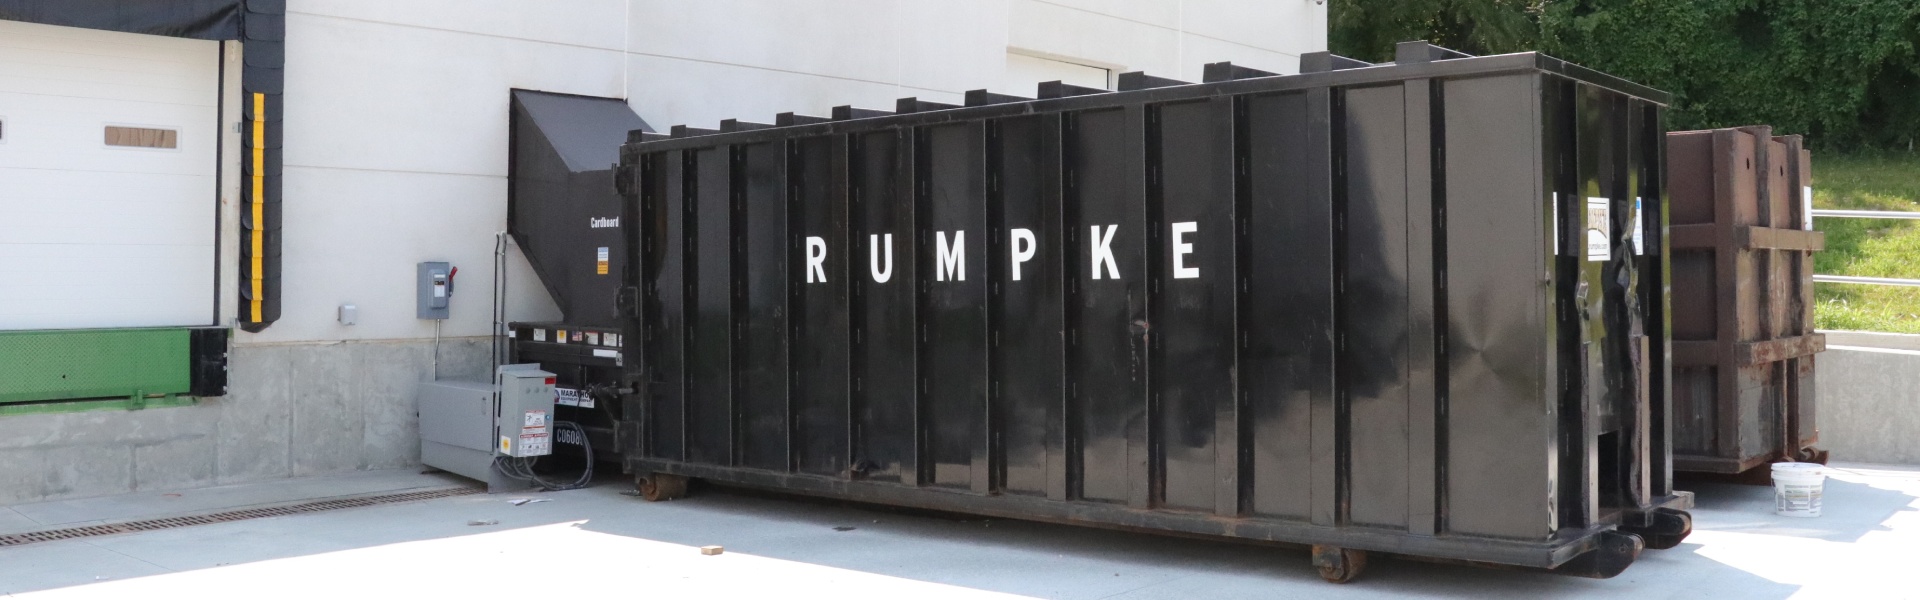 Commercial Trash Compactor For Commercial Waste Rumpke